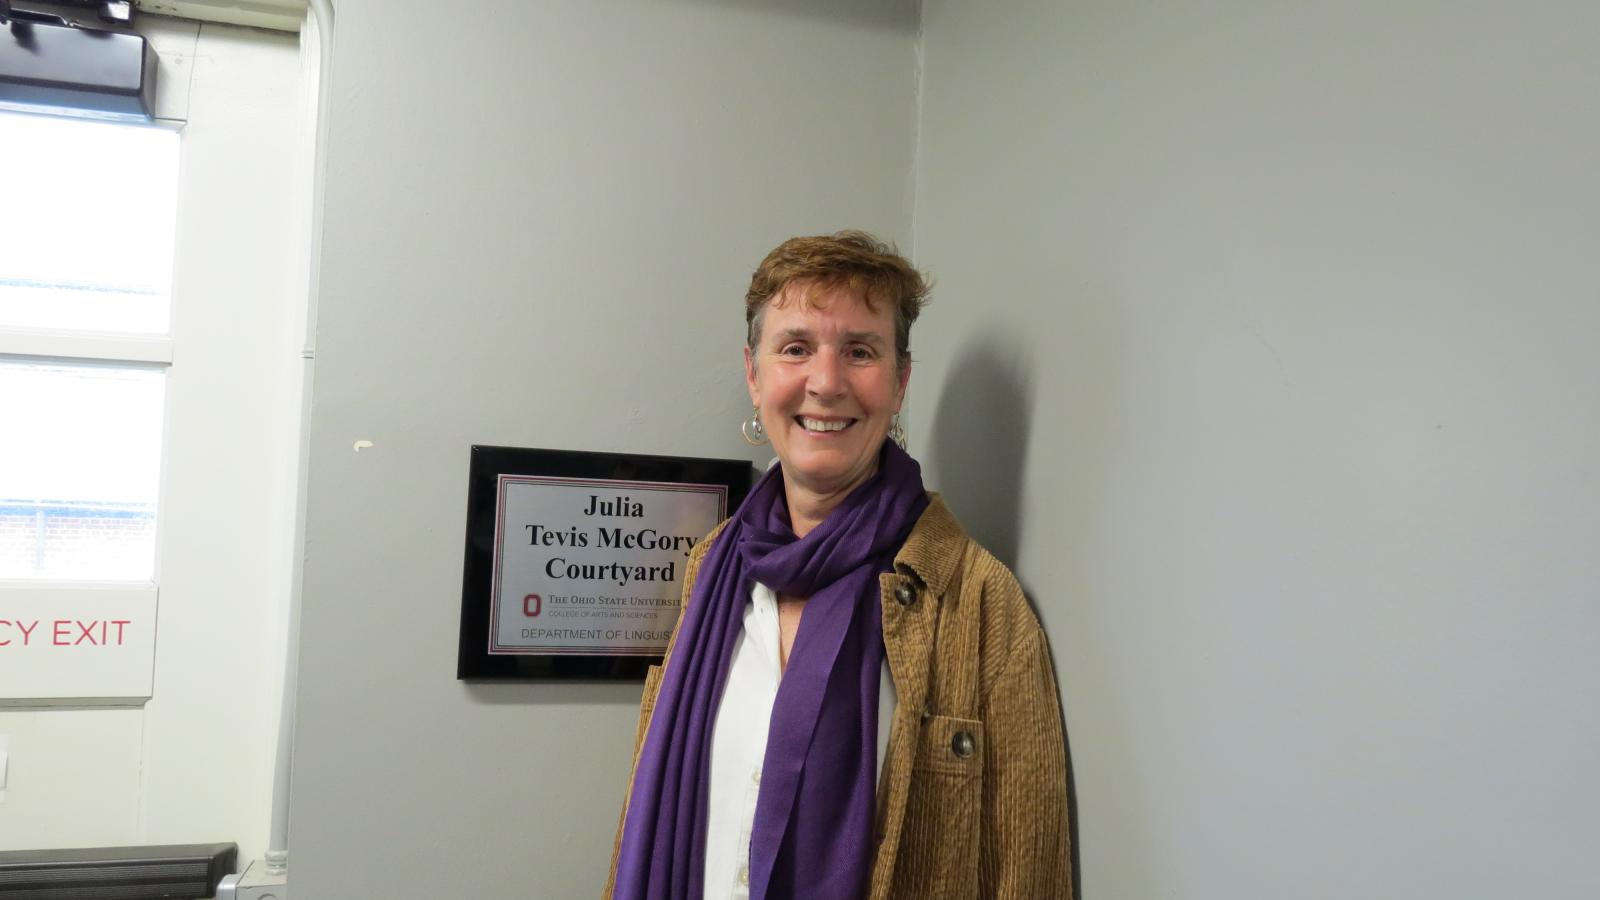 Julie McGory next to the sign for the courtyard